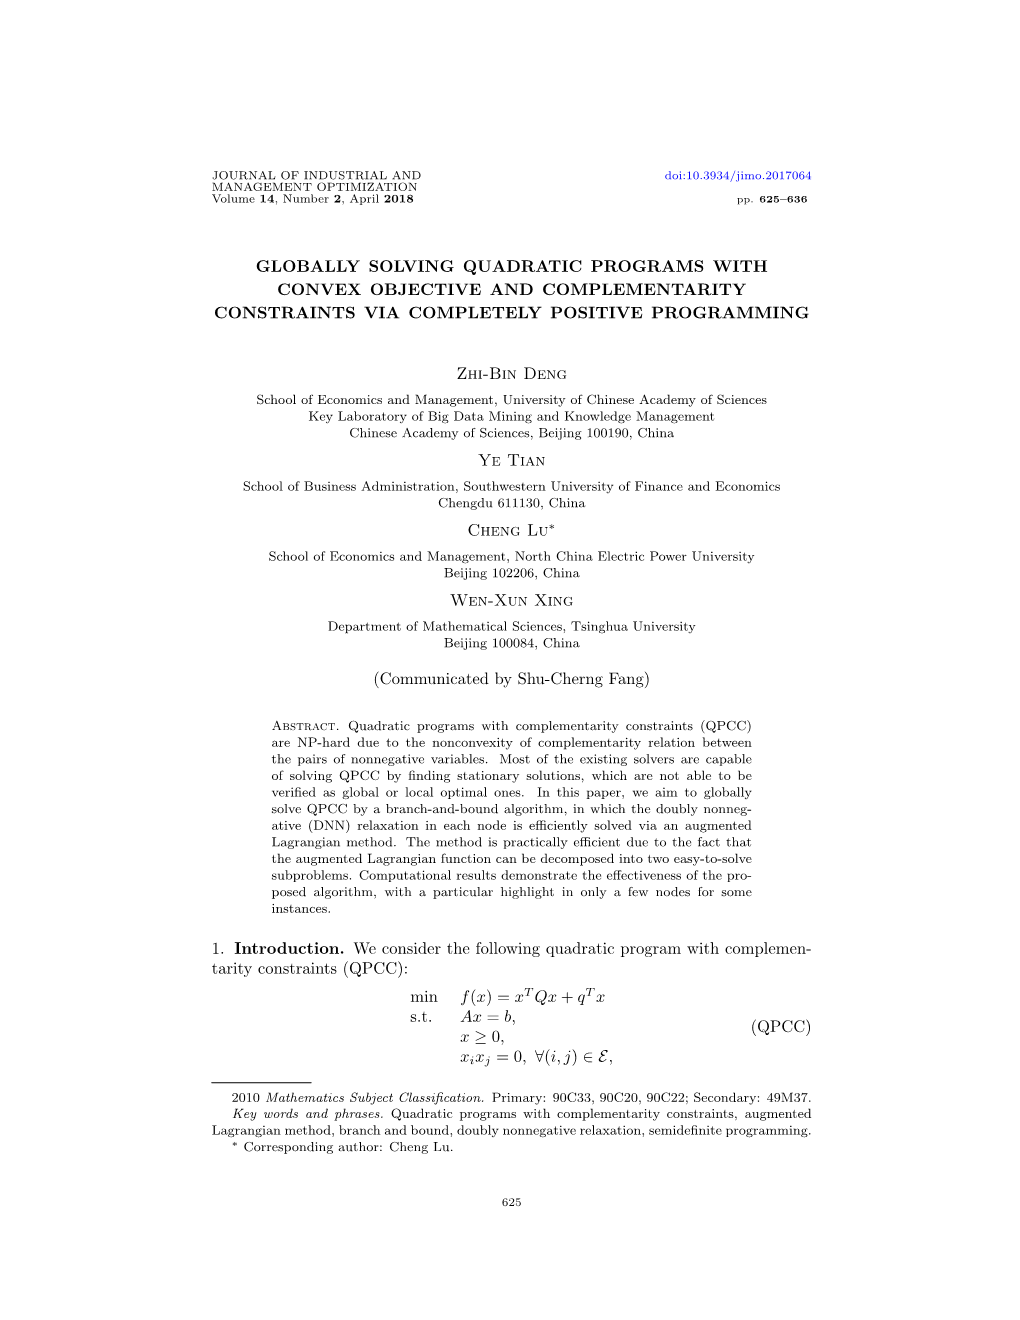 Globally Solving Quadratic Programs with Convex Objective and Complementarity Constraints Via Completely Positive Programming